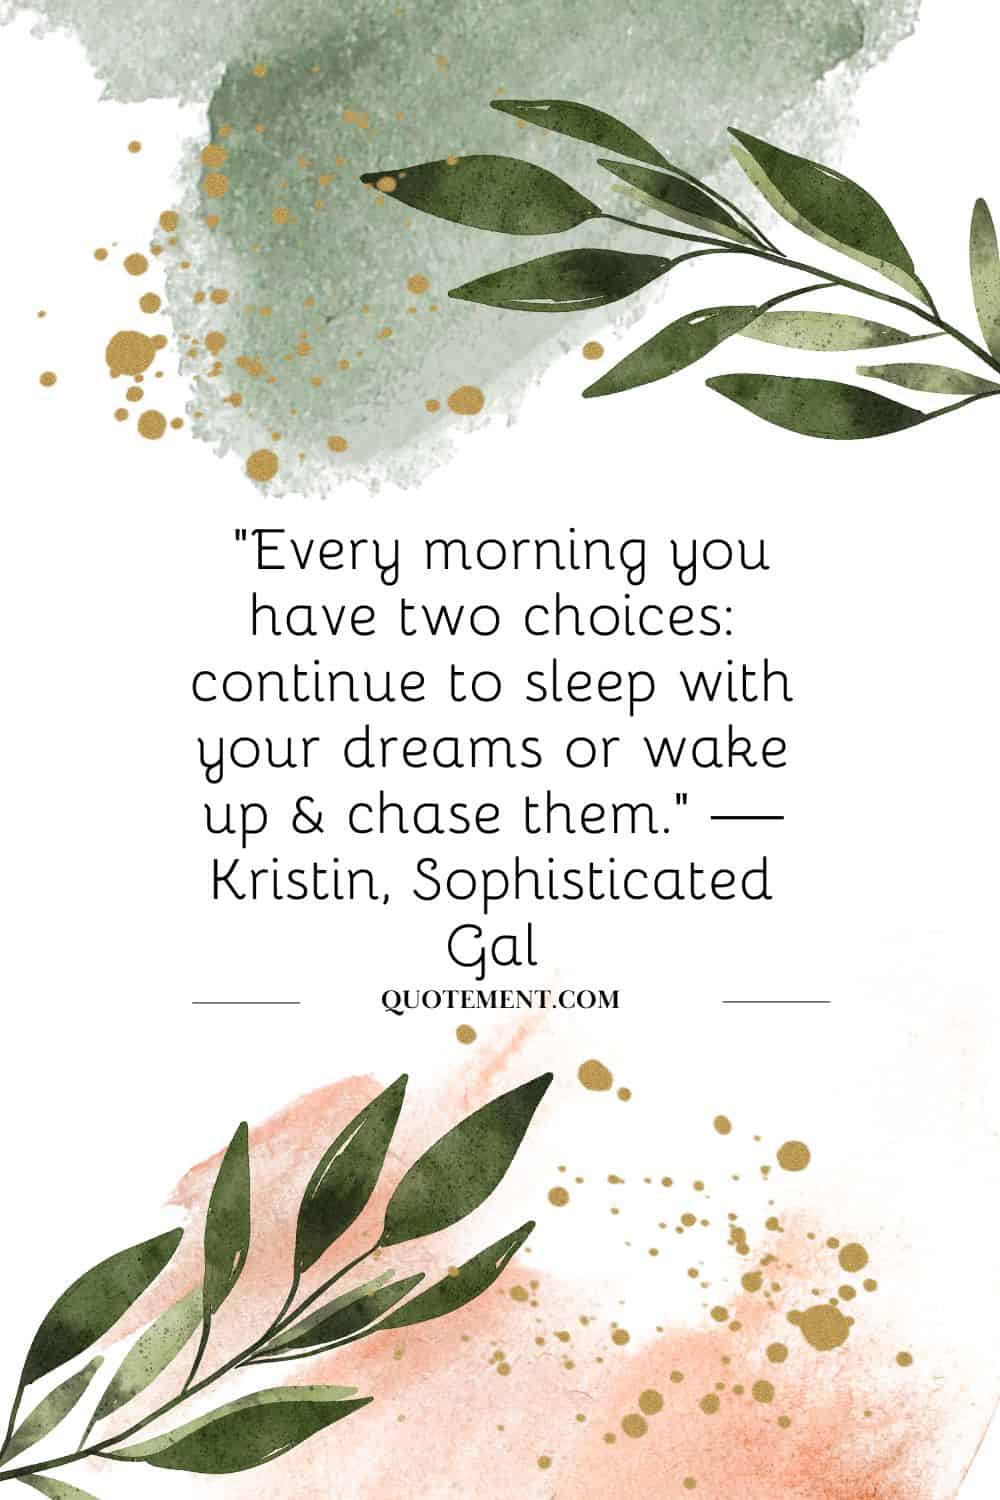 “Every morning you have two choices continue to sleep with your dreams or wake up & chase them.” — Kristin, Sophisticated Gal